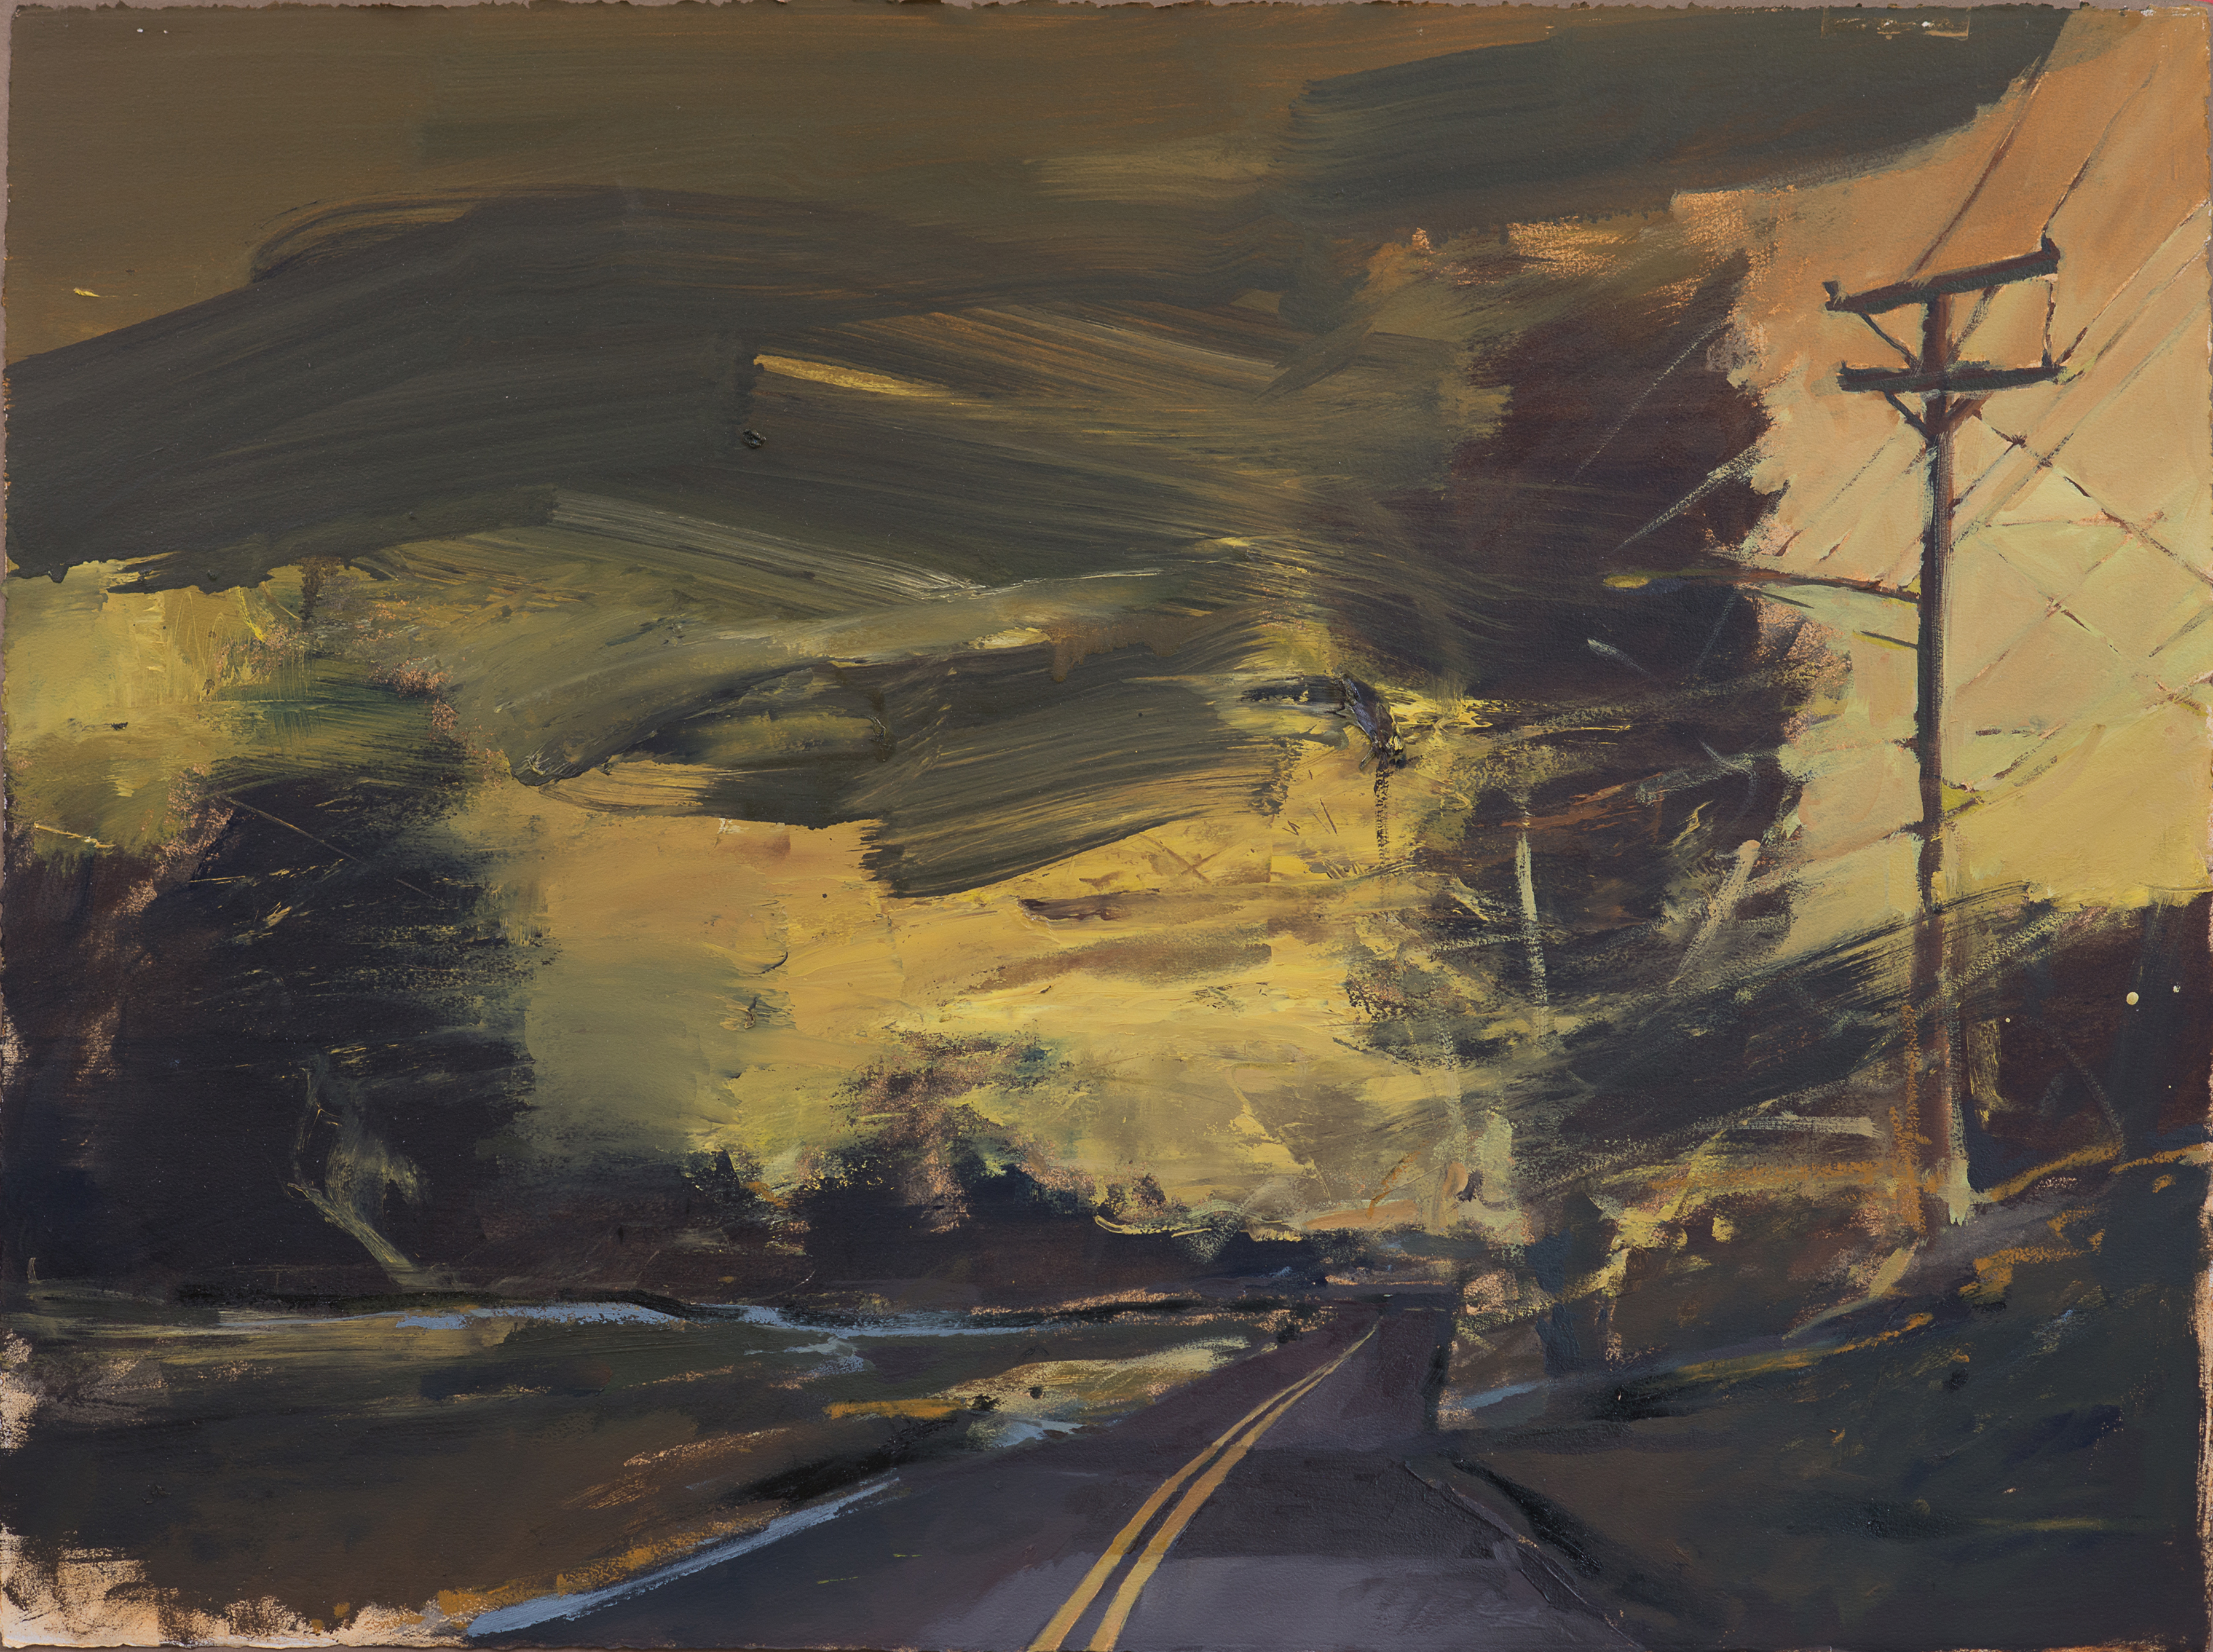 'Yellow Sky,' oil on paper, 22x30 inches, 2022" by Charles Goolsby is part of Emory & Henry faculty exhibition.